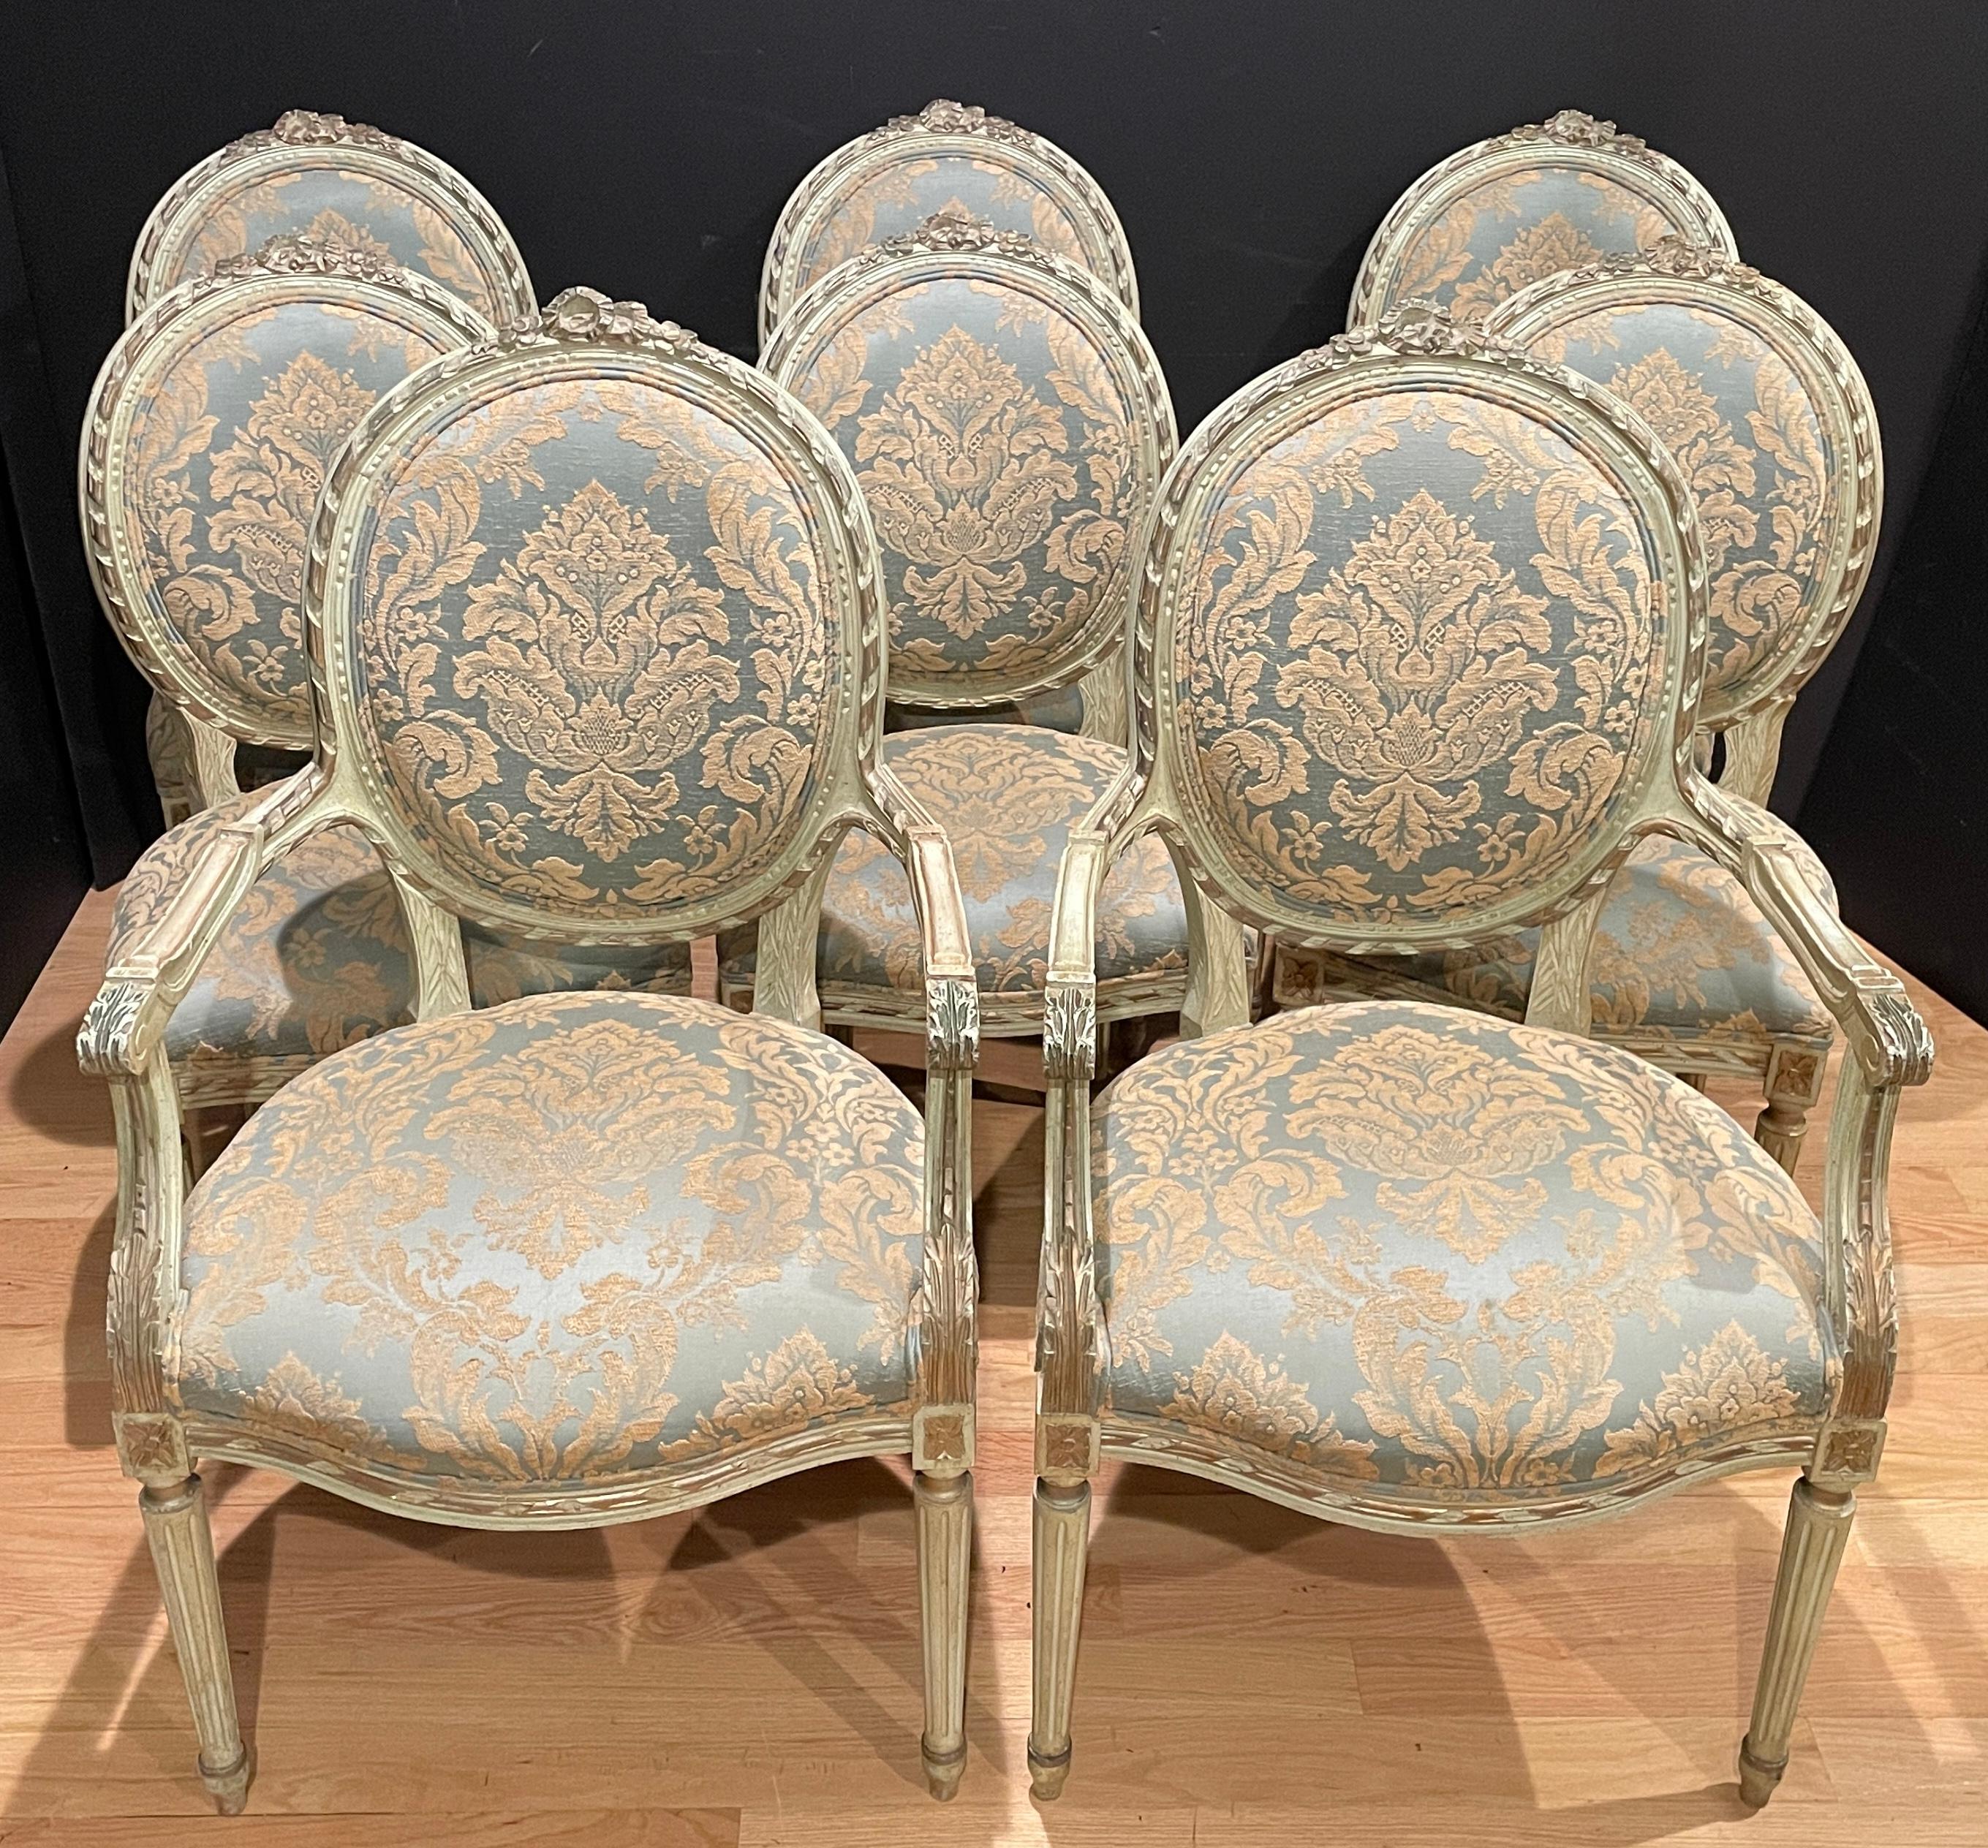 Set of eight Louis XVI style 19th century hand carved, painted and gilt dining chairs. Carved ribbon and rosettes.
Measures: Armchairs: 24